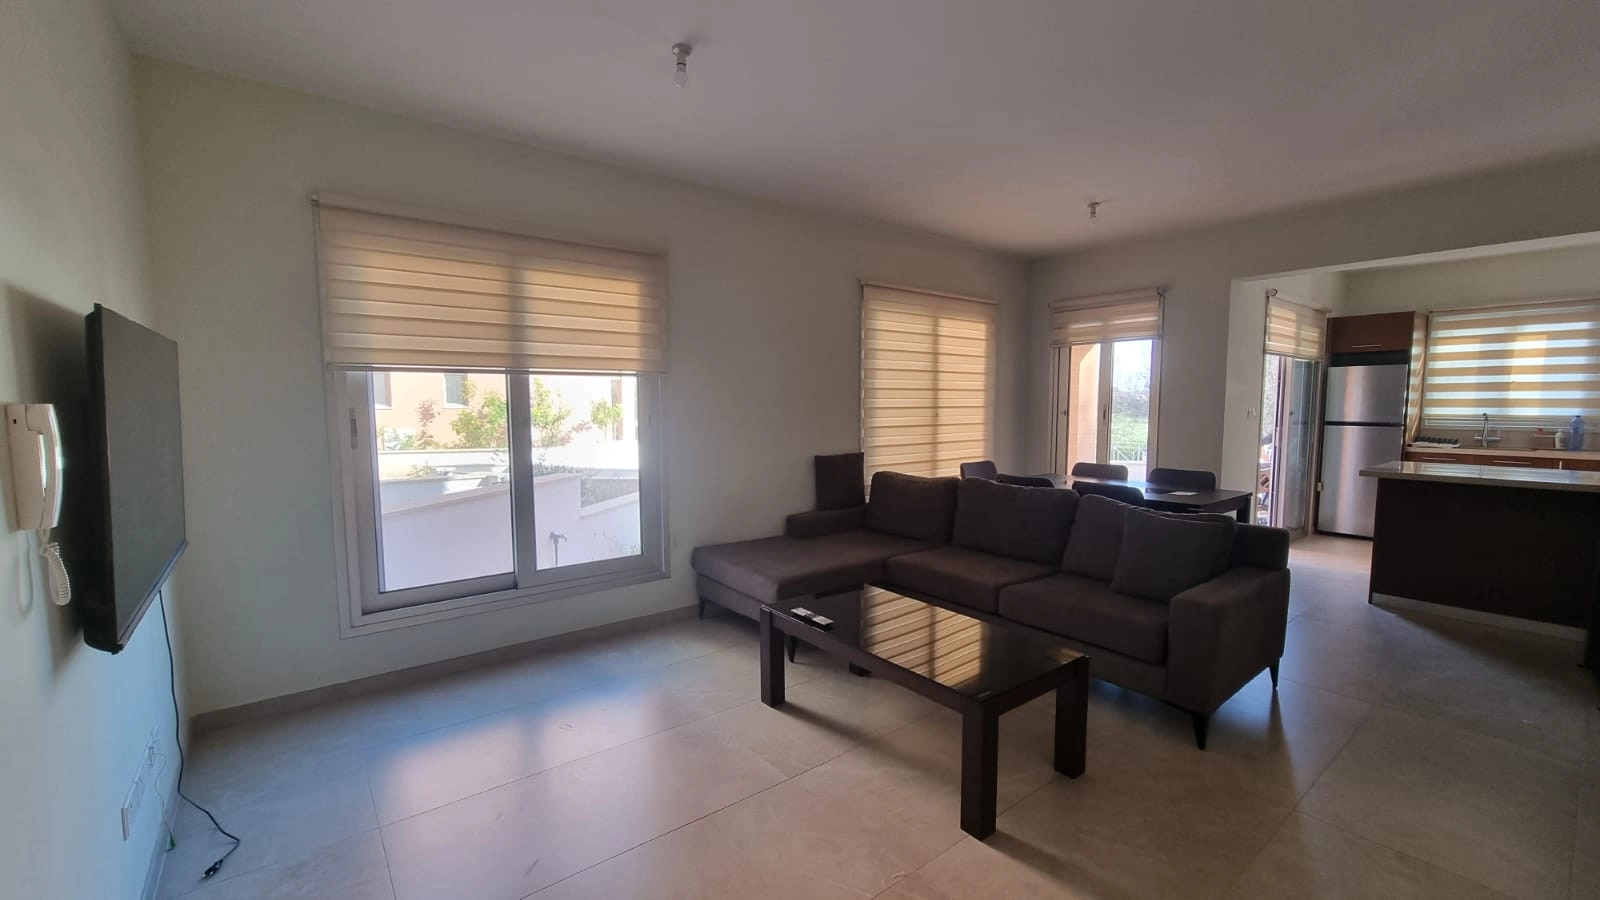 2 Bedroom Apartment for Rent in Paphos